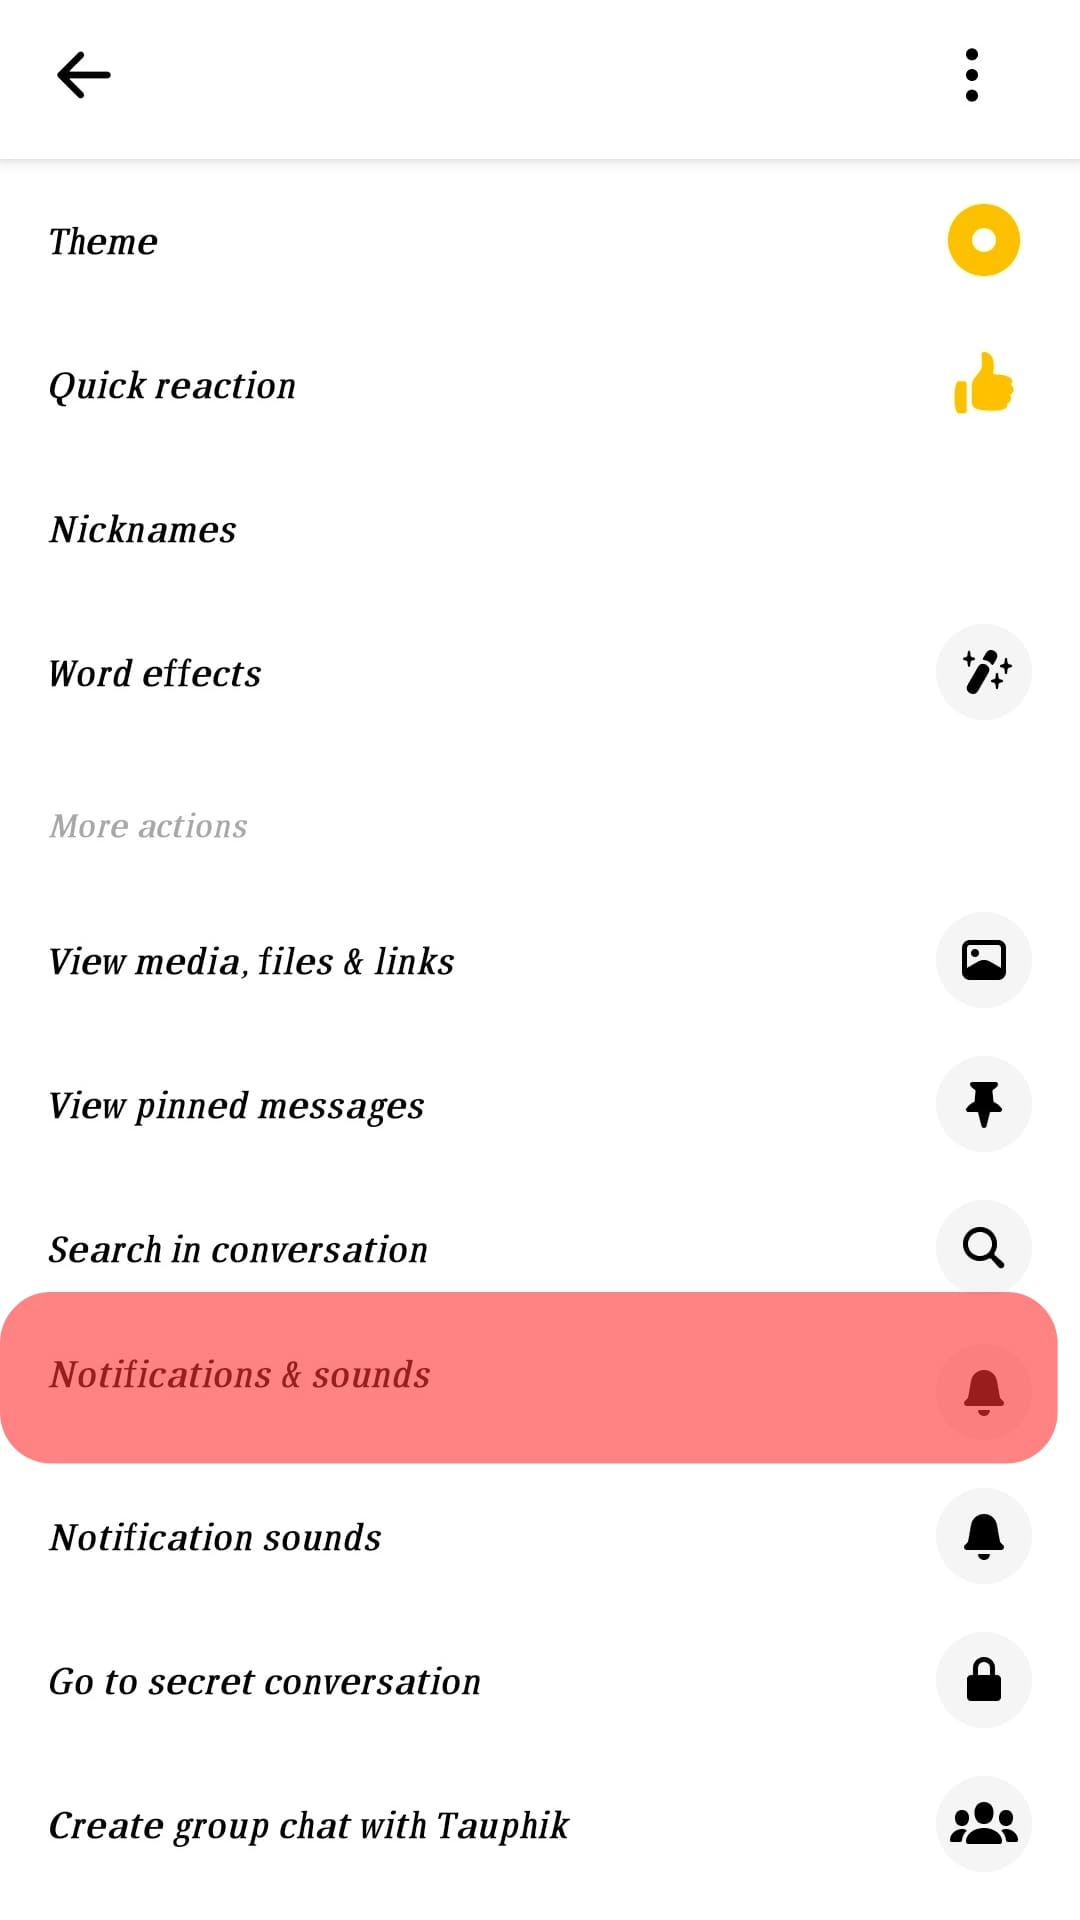 Click The Notifications Sounds Option